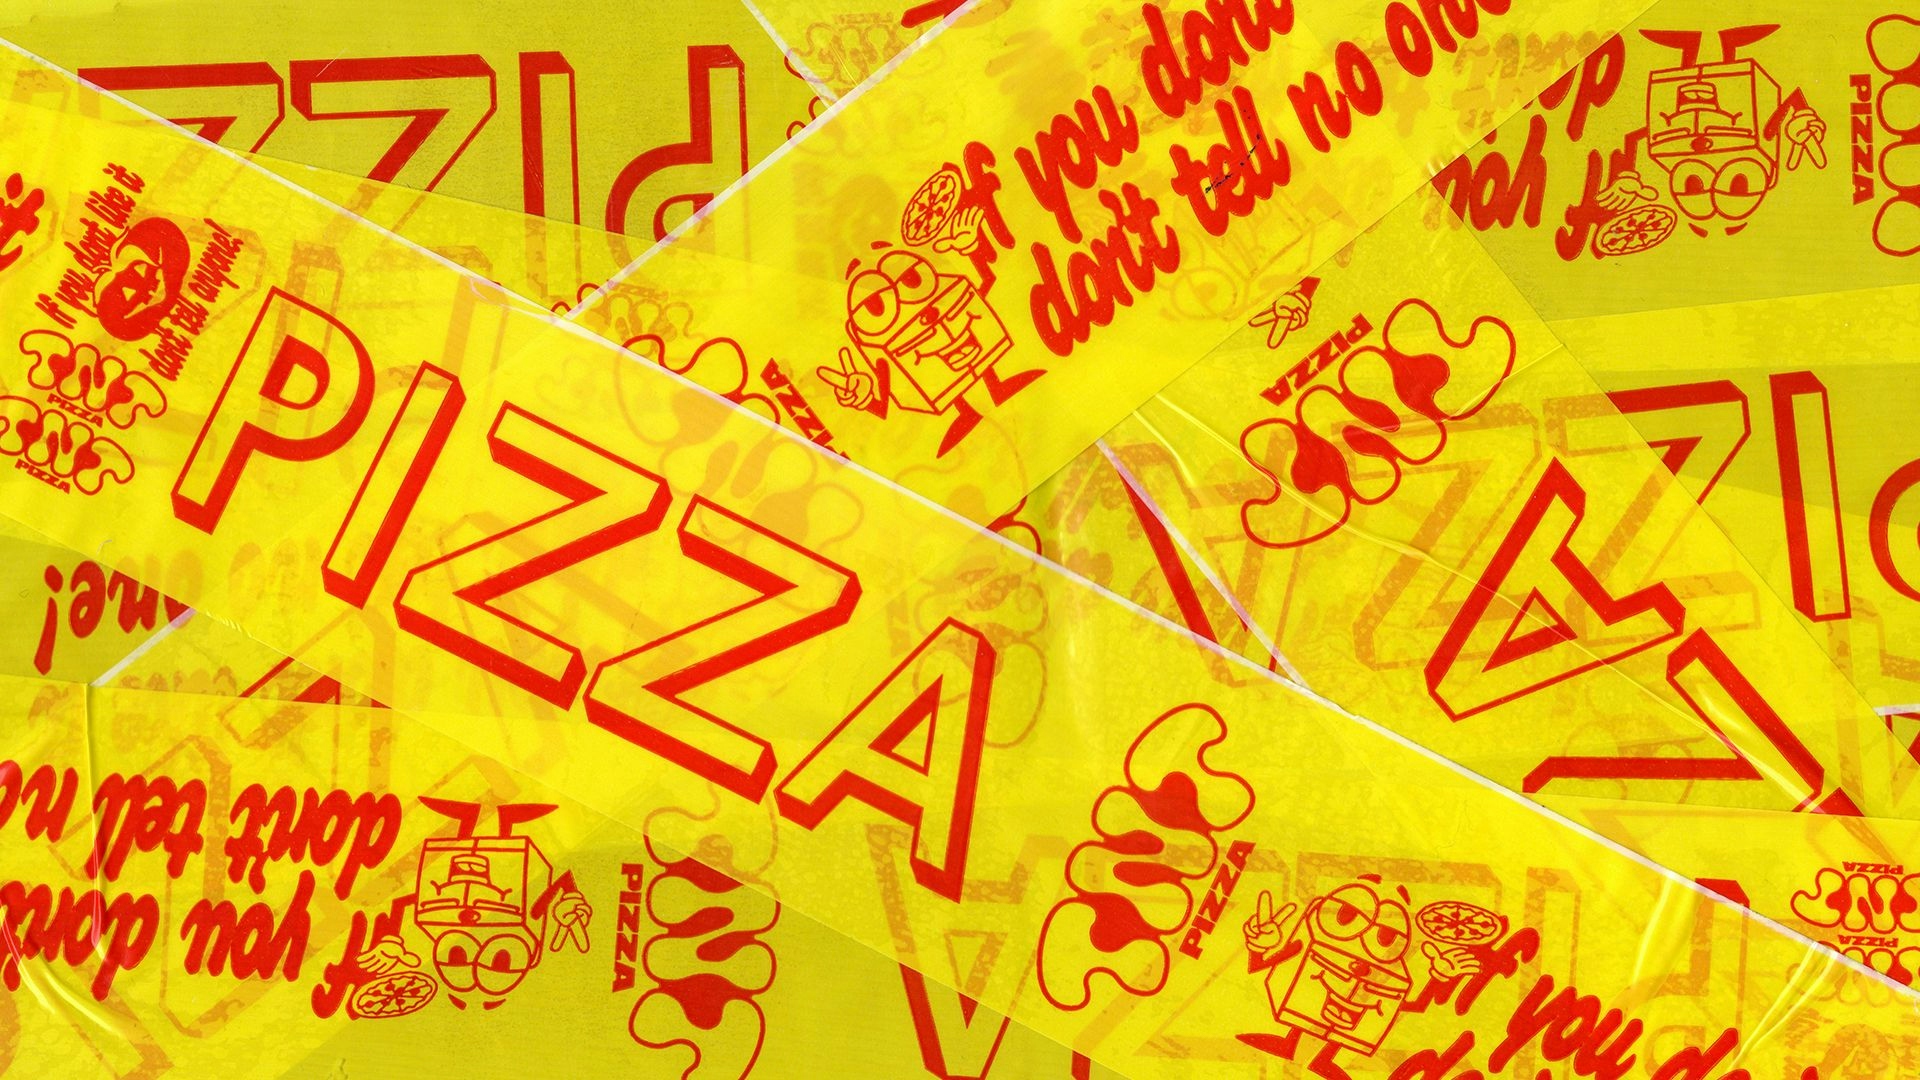 TNT Pizza yellow brand materials from the Brand Identity & Packaging project